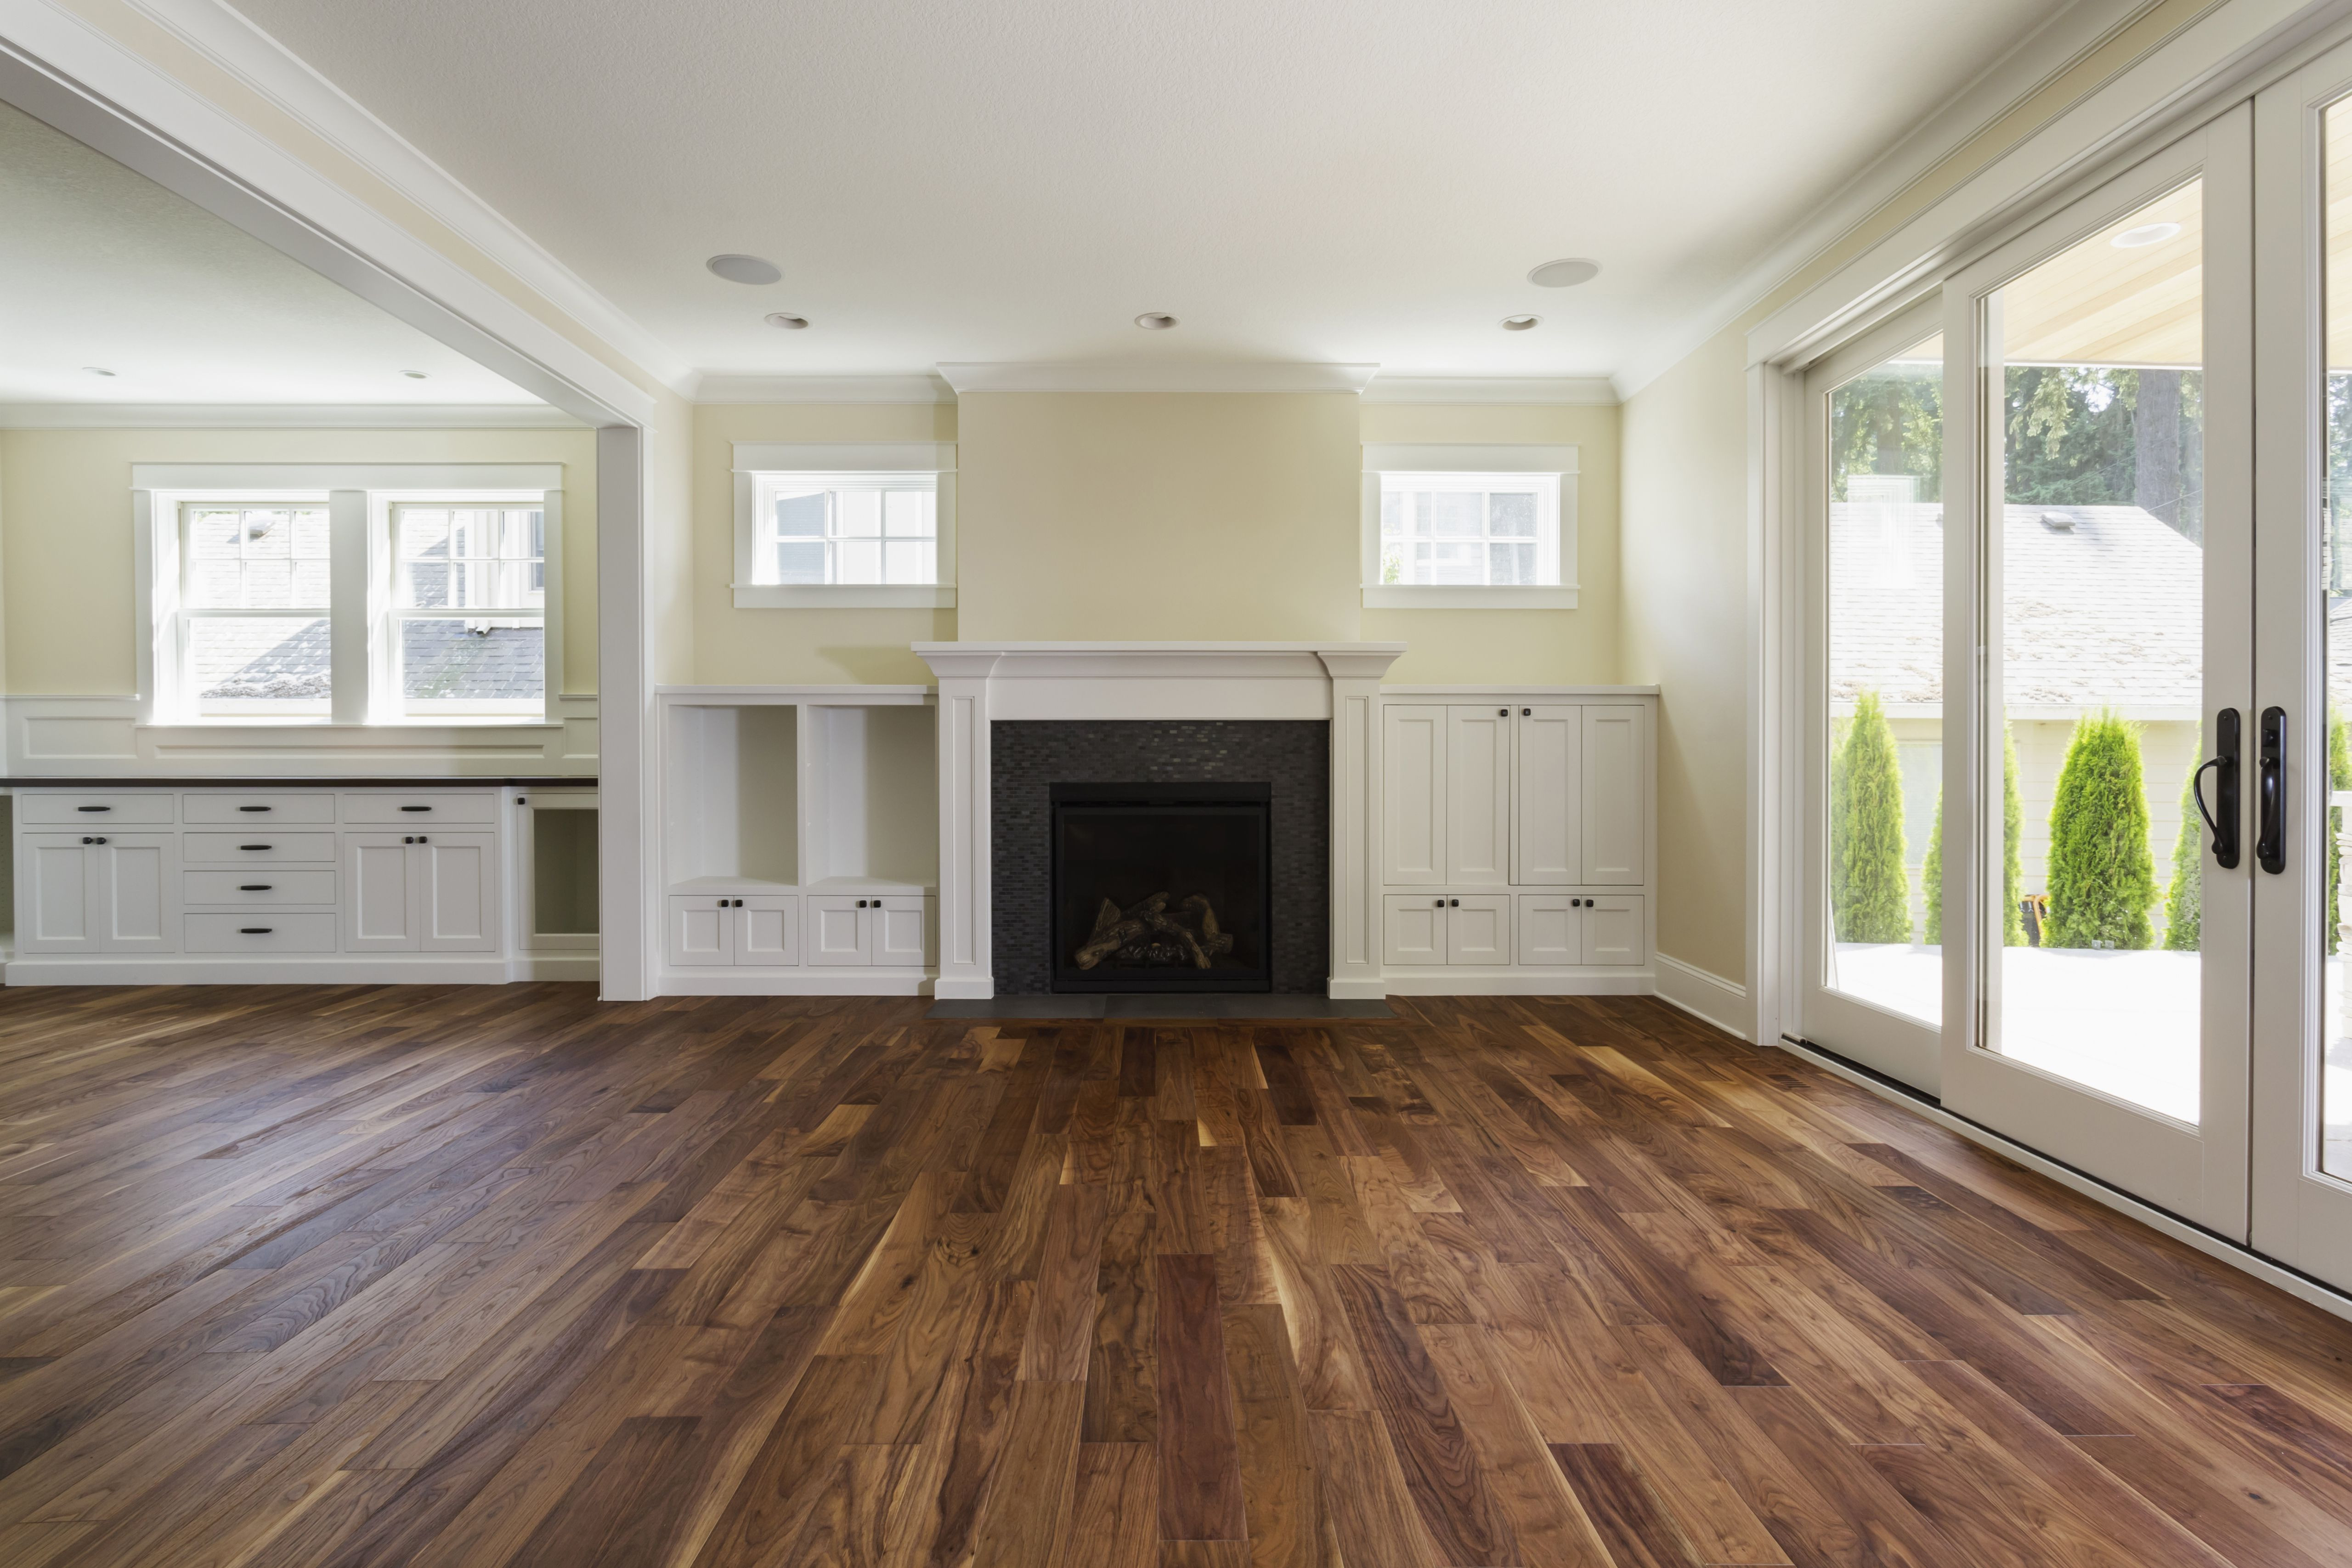 red oak hardwood flooring reviews of the pros and cons of prefinished hardwood flooring within fireplace and built in shelves in living room 482143011 57bef8e33df78cc16e035397